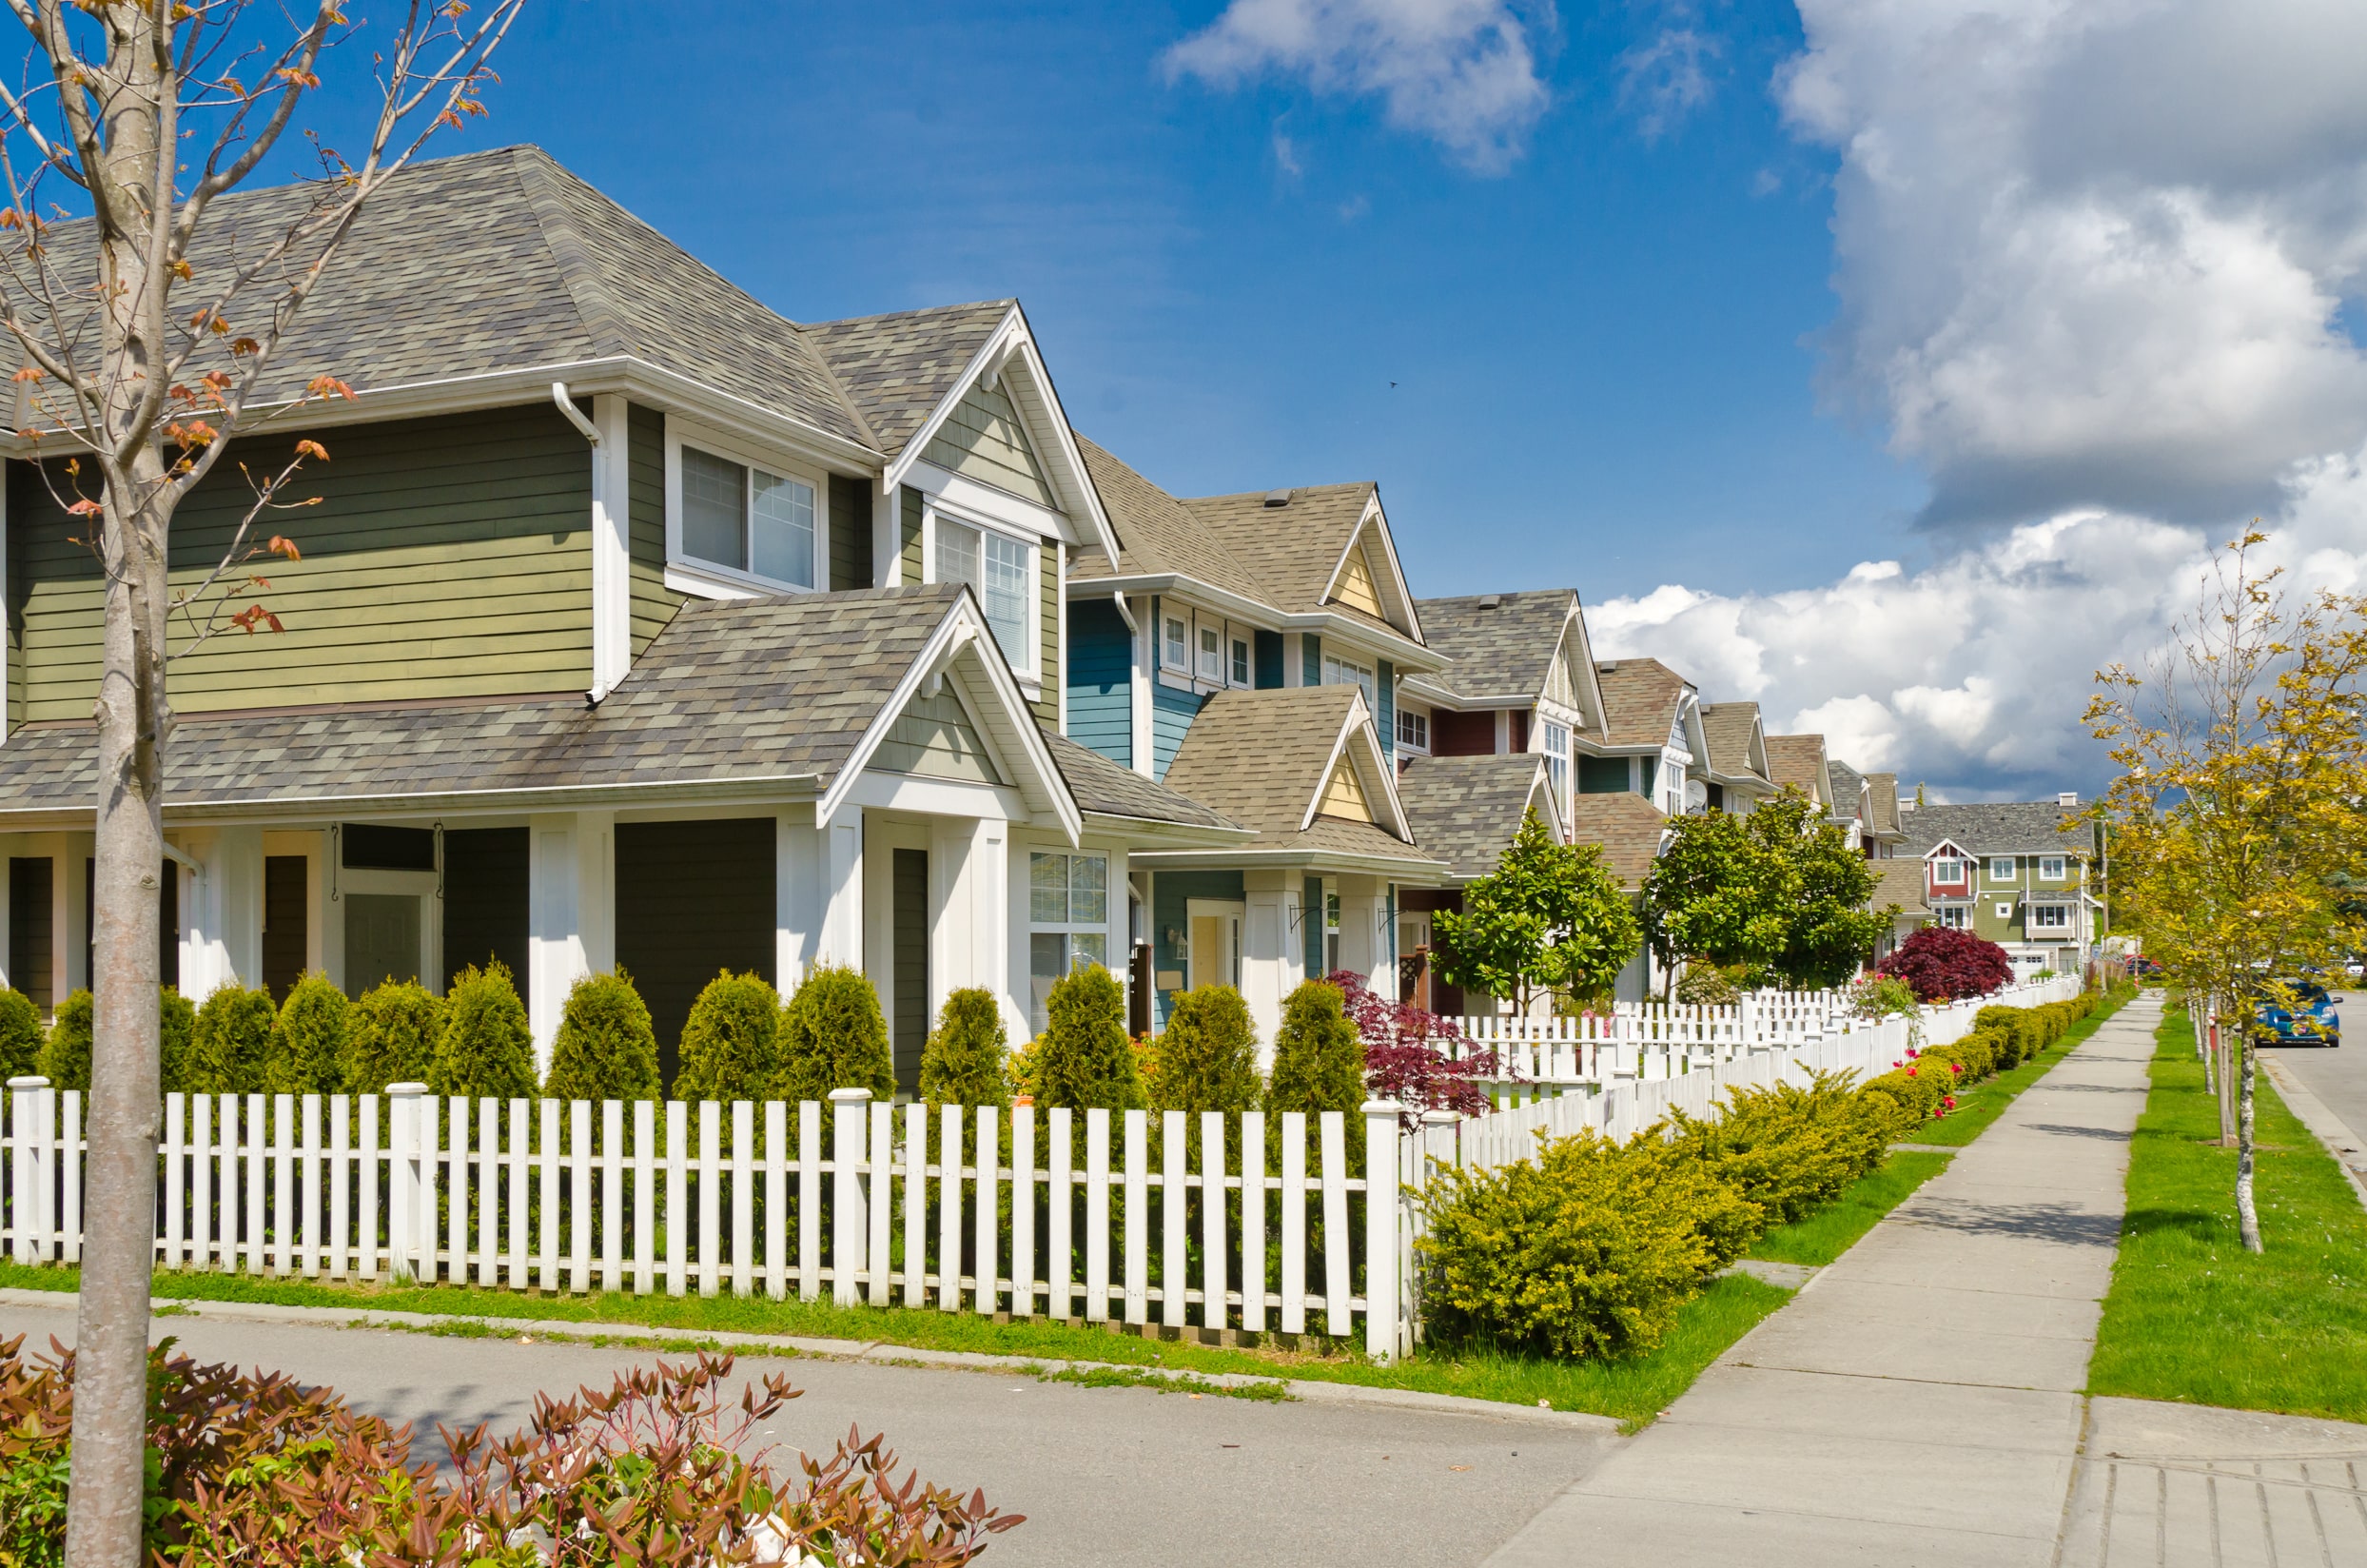 Why Should You Emphasize On Choosing Your House In A Good Neighbourhood?